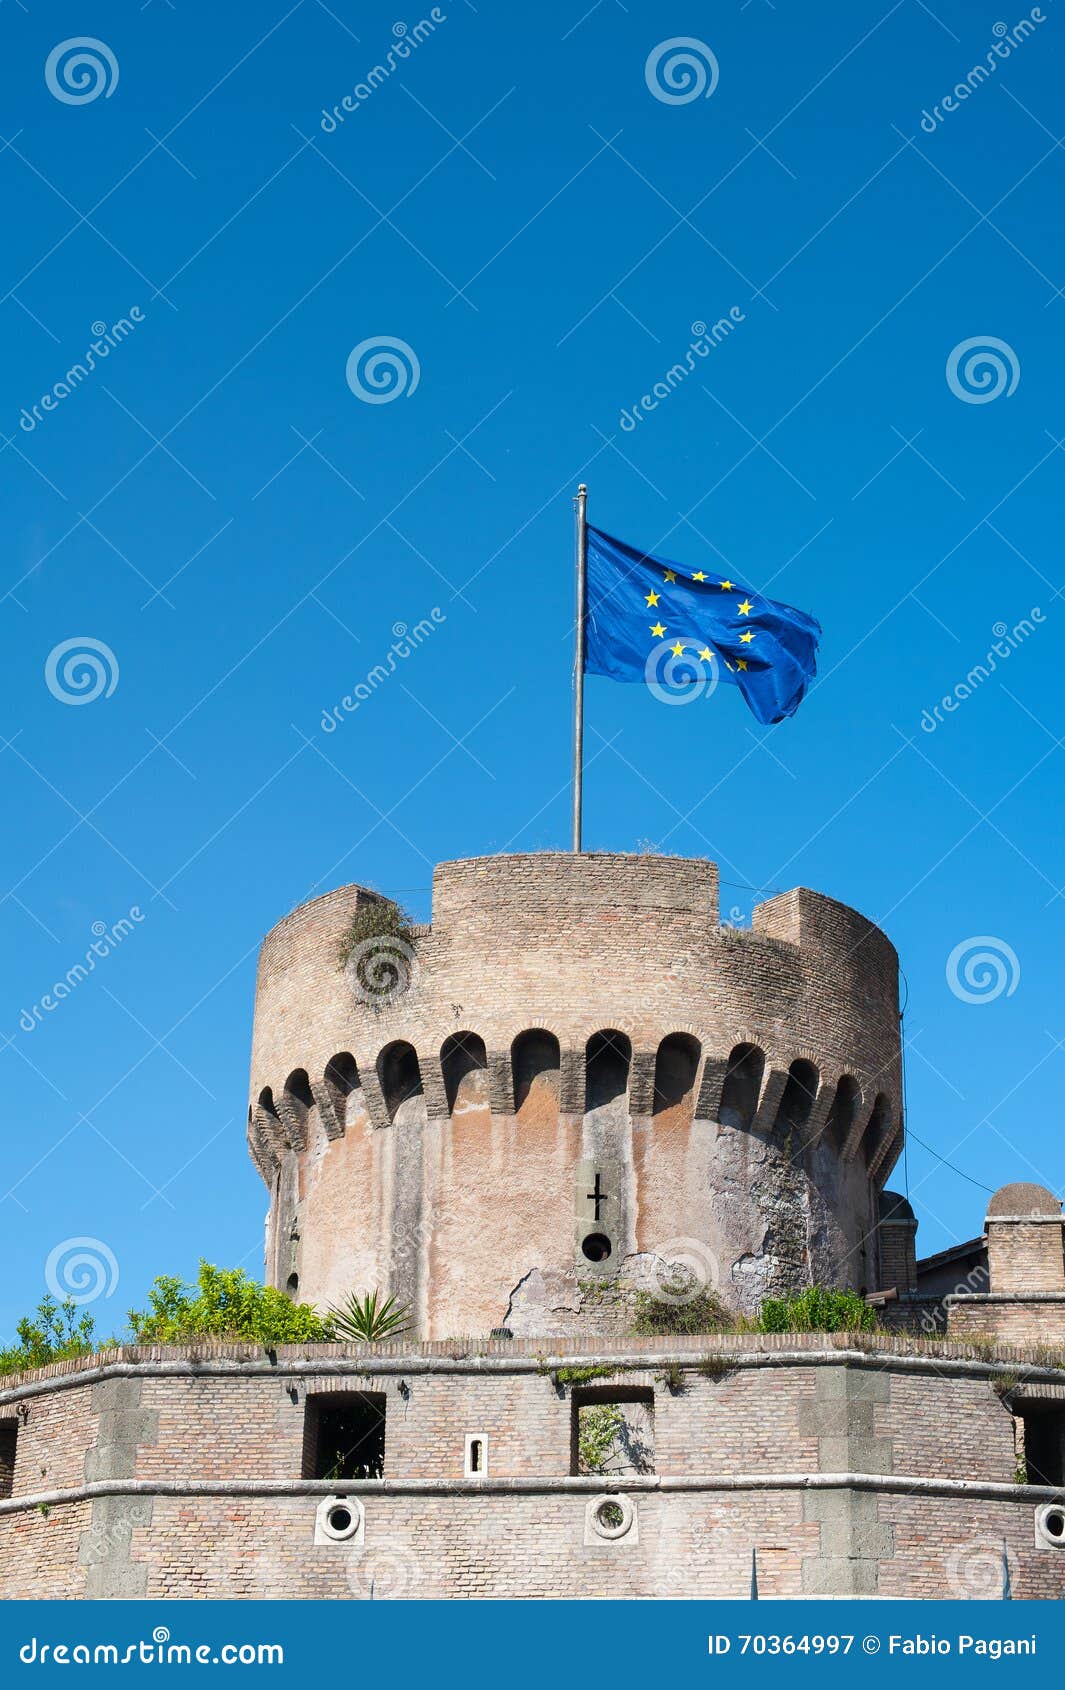 Medieval Tower with Blue European Flag on Top Stock Image - Image of